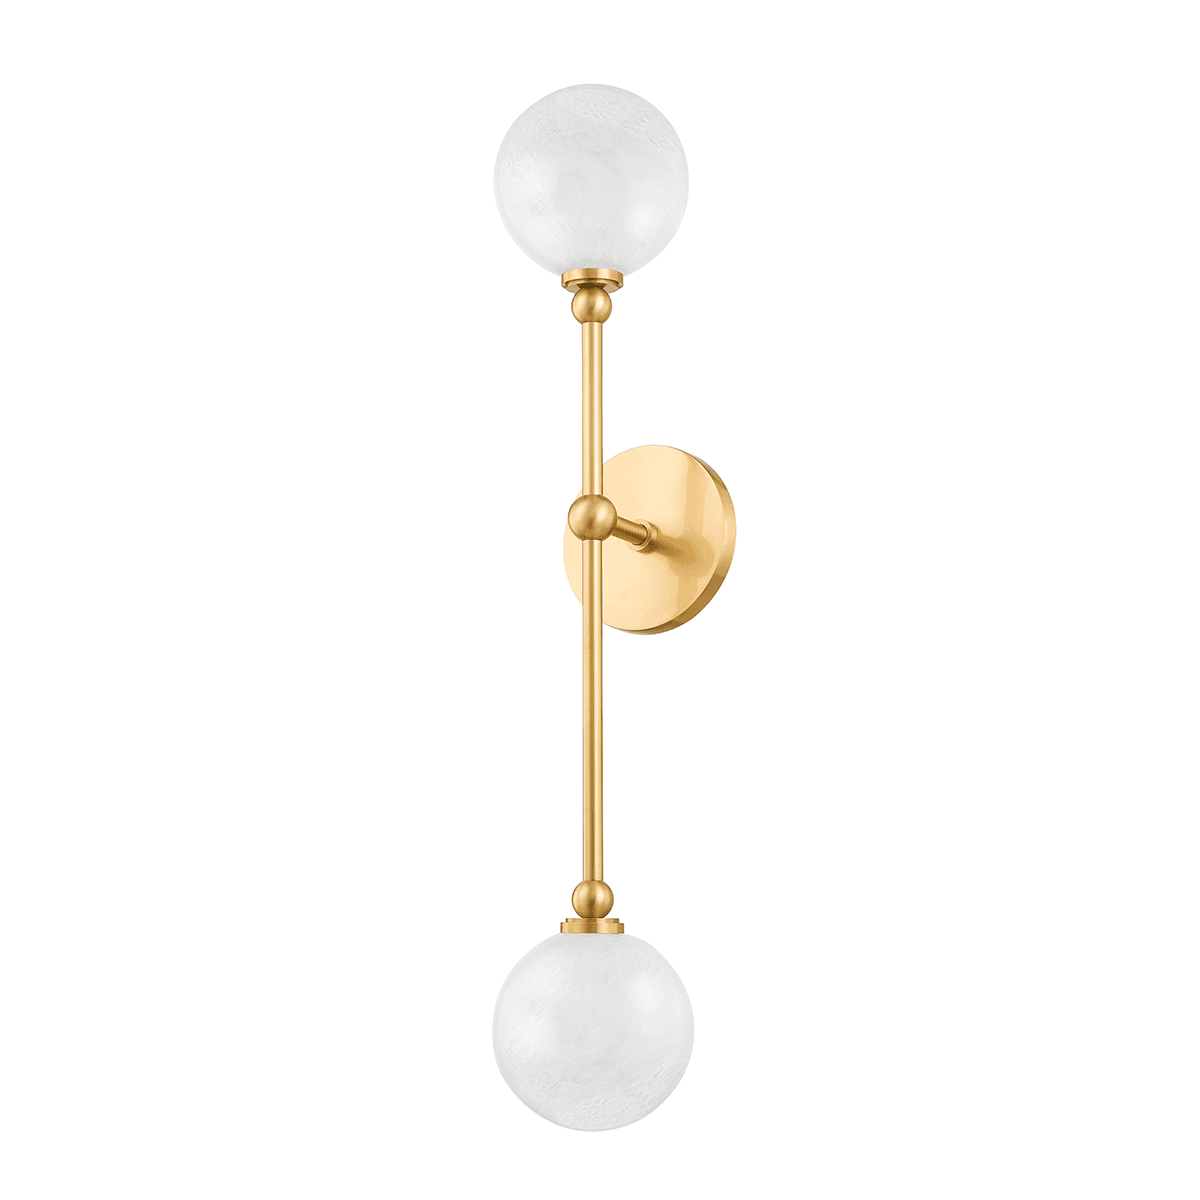 Hudson Valley Lighting - Andrews LED Wall Sconce - 4802-AGB | Montreal Lighting & Hardware